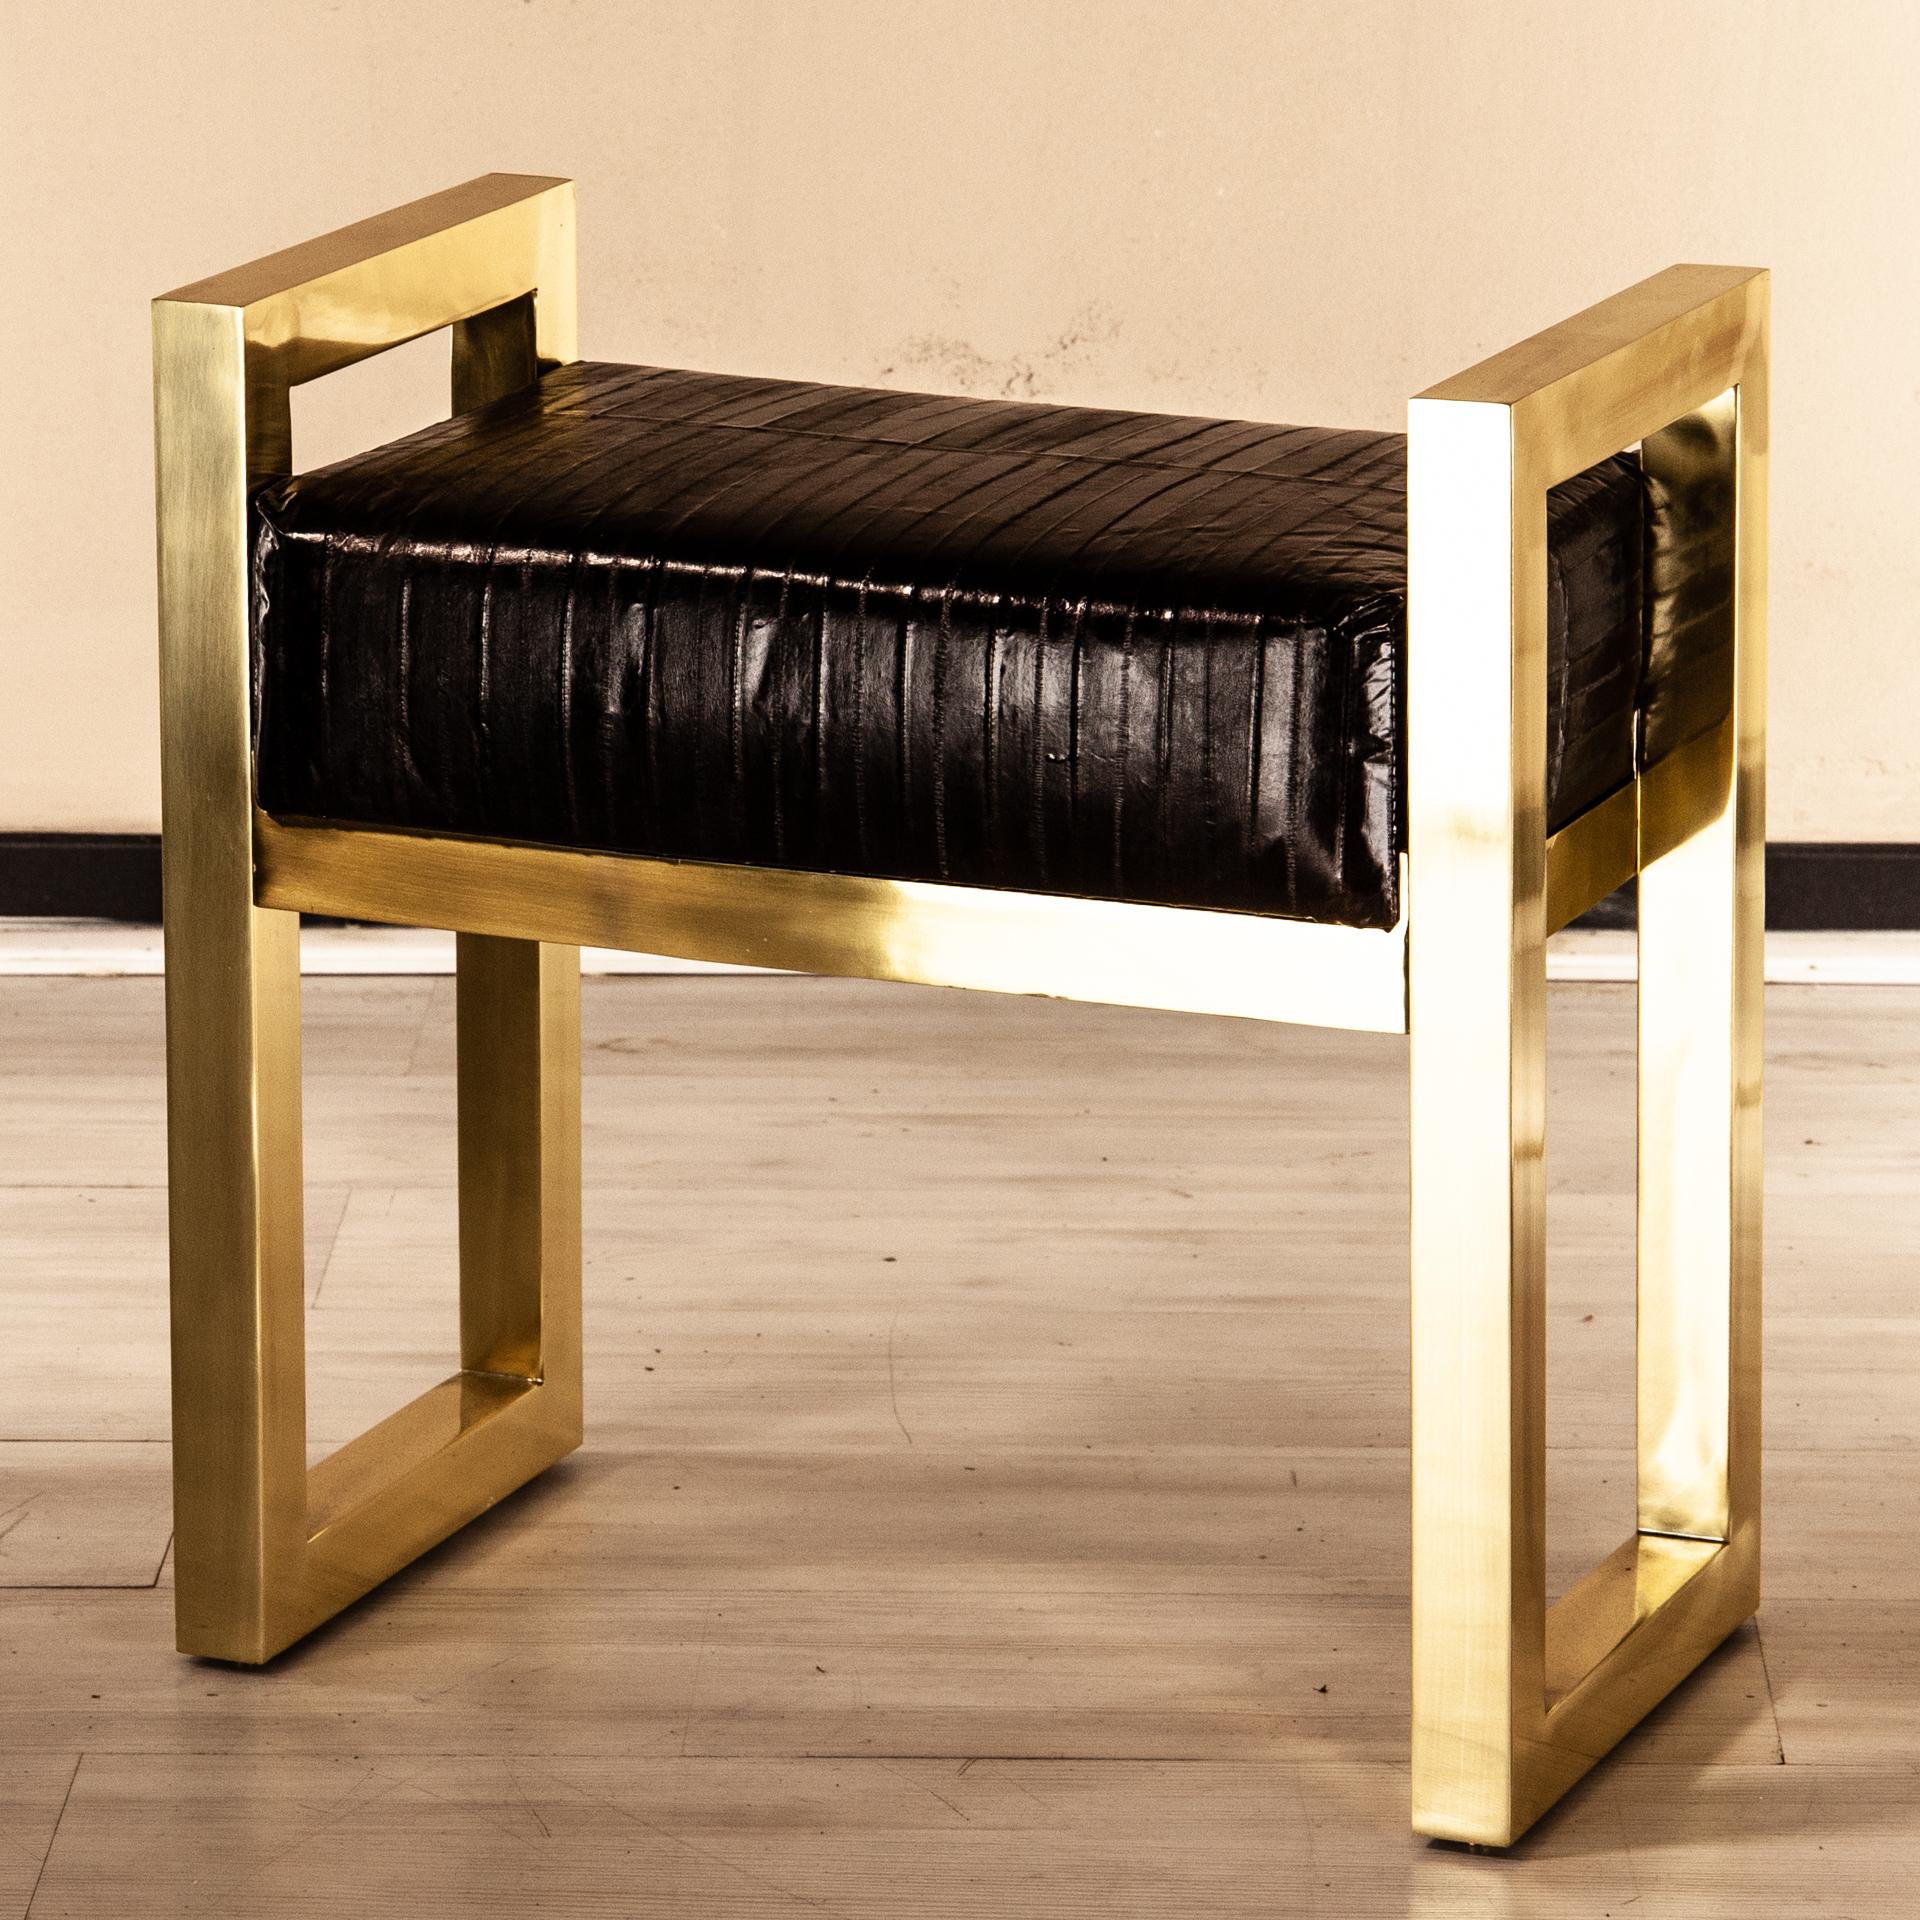 Selezioni Domus Florence bench stool Agrife solid brass and natural eel leather.

A beautiful dressy occasional stool with high end details and a great metalwork that frames a Mid-Century Modern eel leather upholstery.

Made in Florence, Tuscany